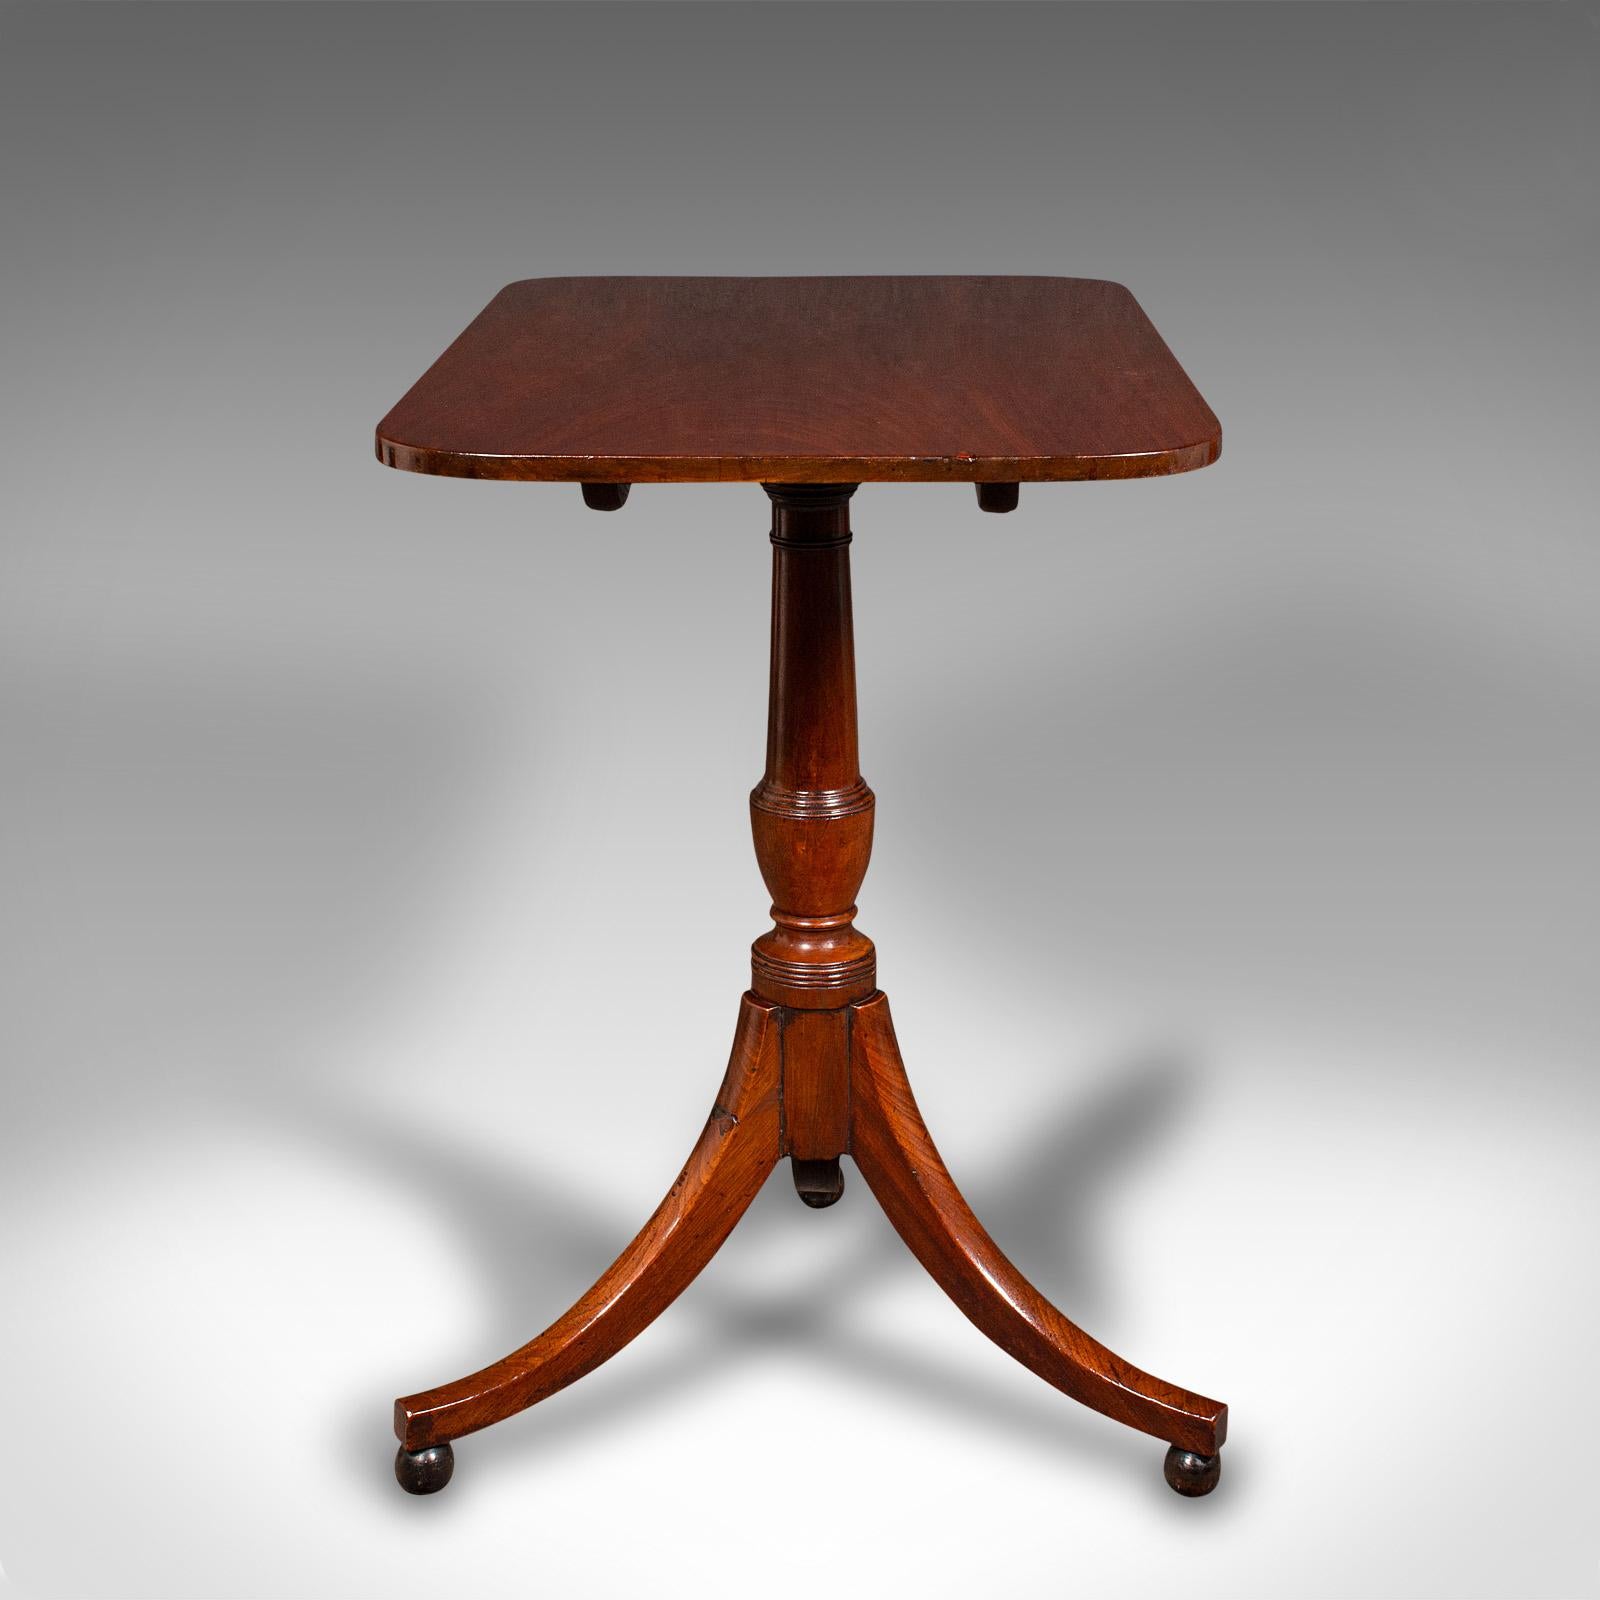 British Antique Supper Table, English, Snap Top, Lamp, Occasional, Regency, Circa 1820 For Sale